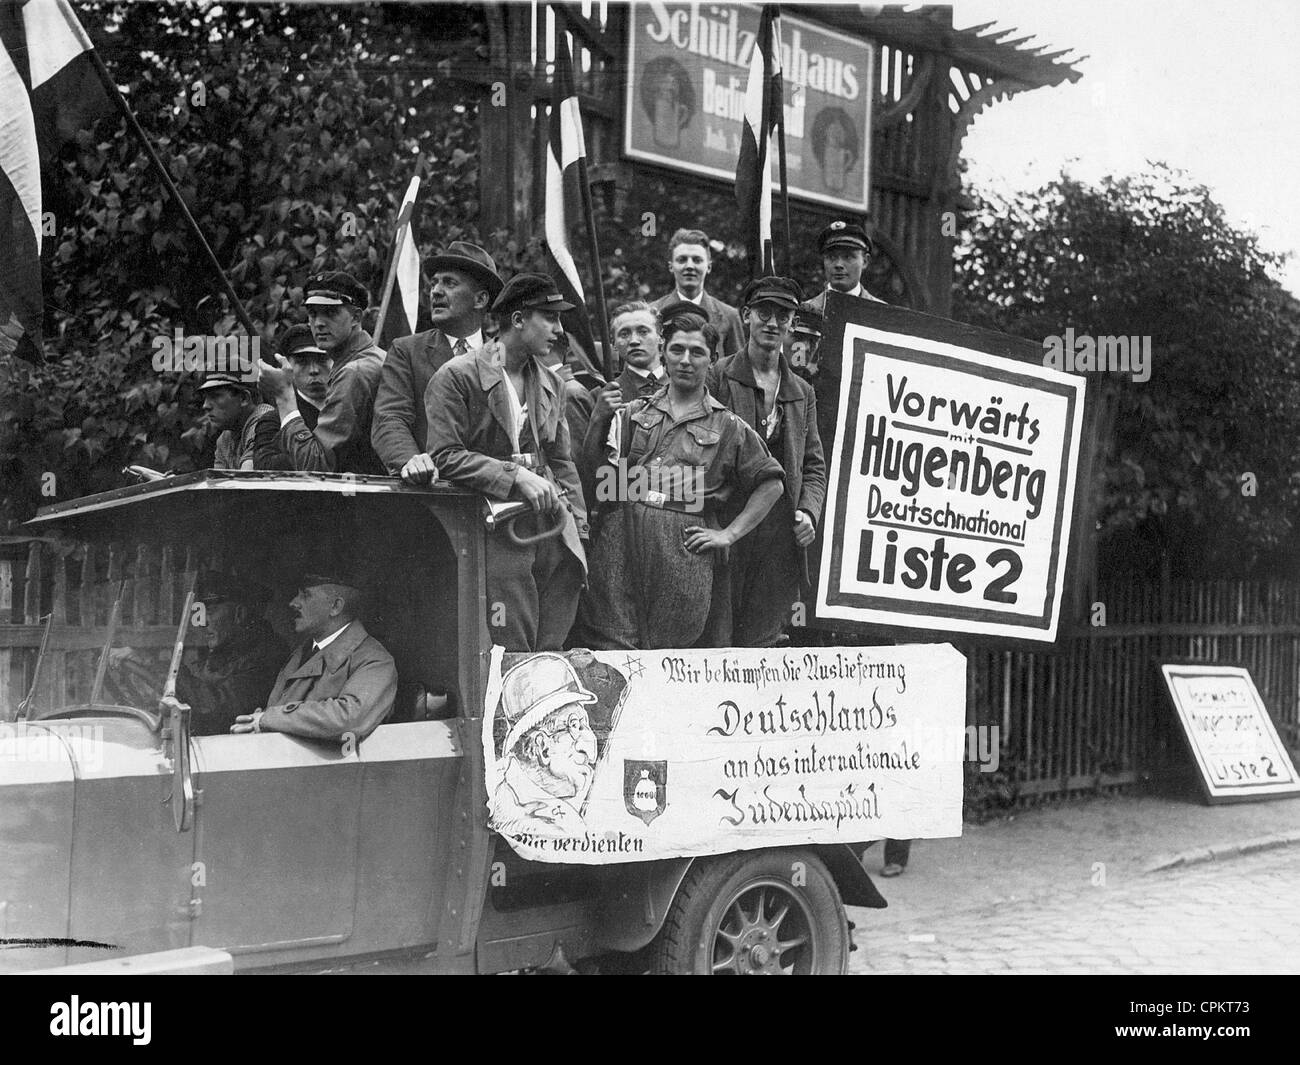 Members of the DNVP campaigning for the general election with anti-semitic propaganda, Berlin, 1932 (b/w photo) Stock Photo